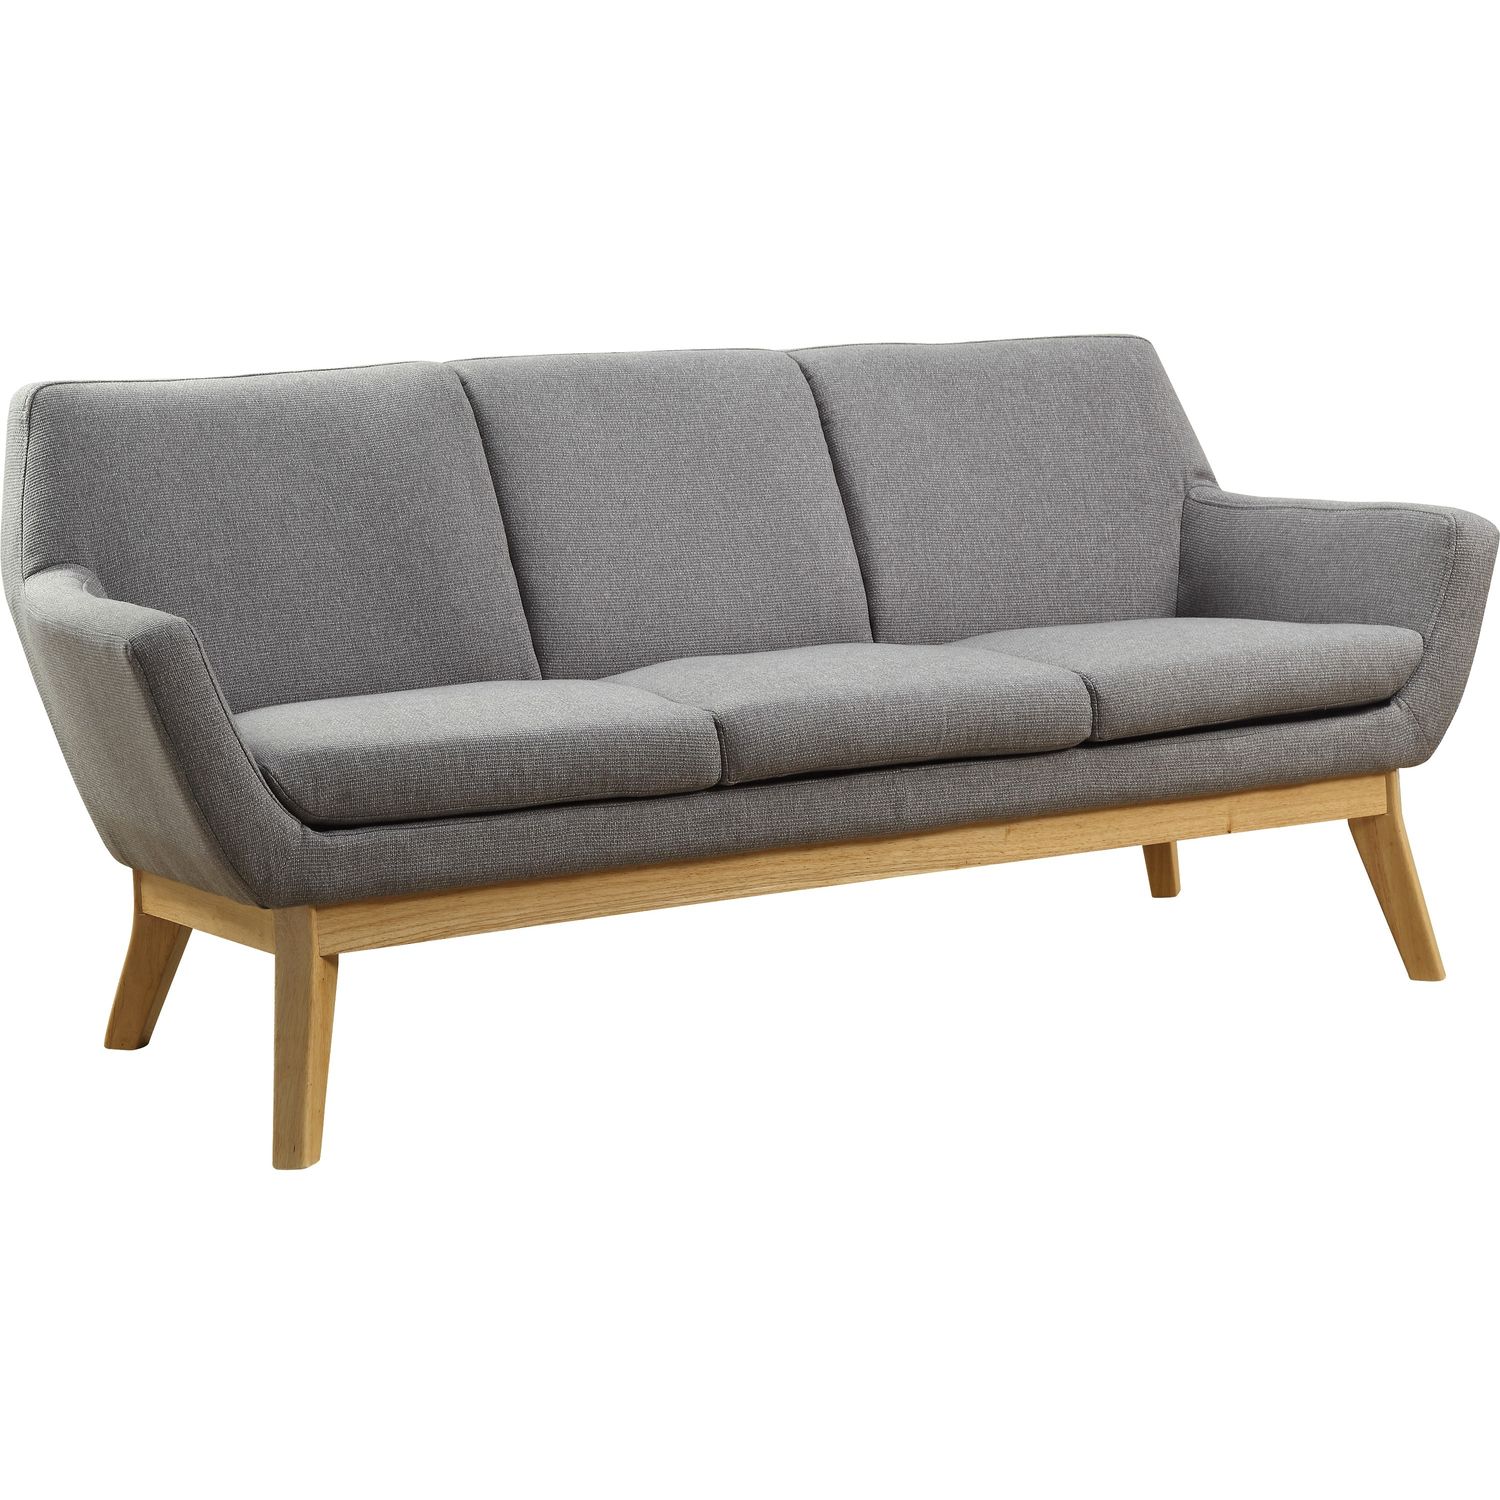 Quintessence Collection Upholstered Sofa 19.8" x 73.3" x 32.8", Material: Wood Leg, Finish: Gray